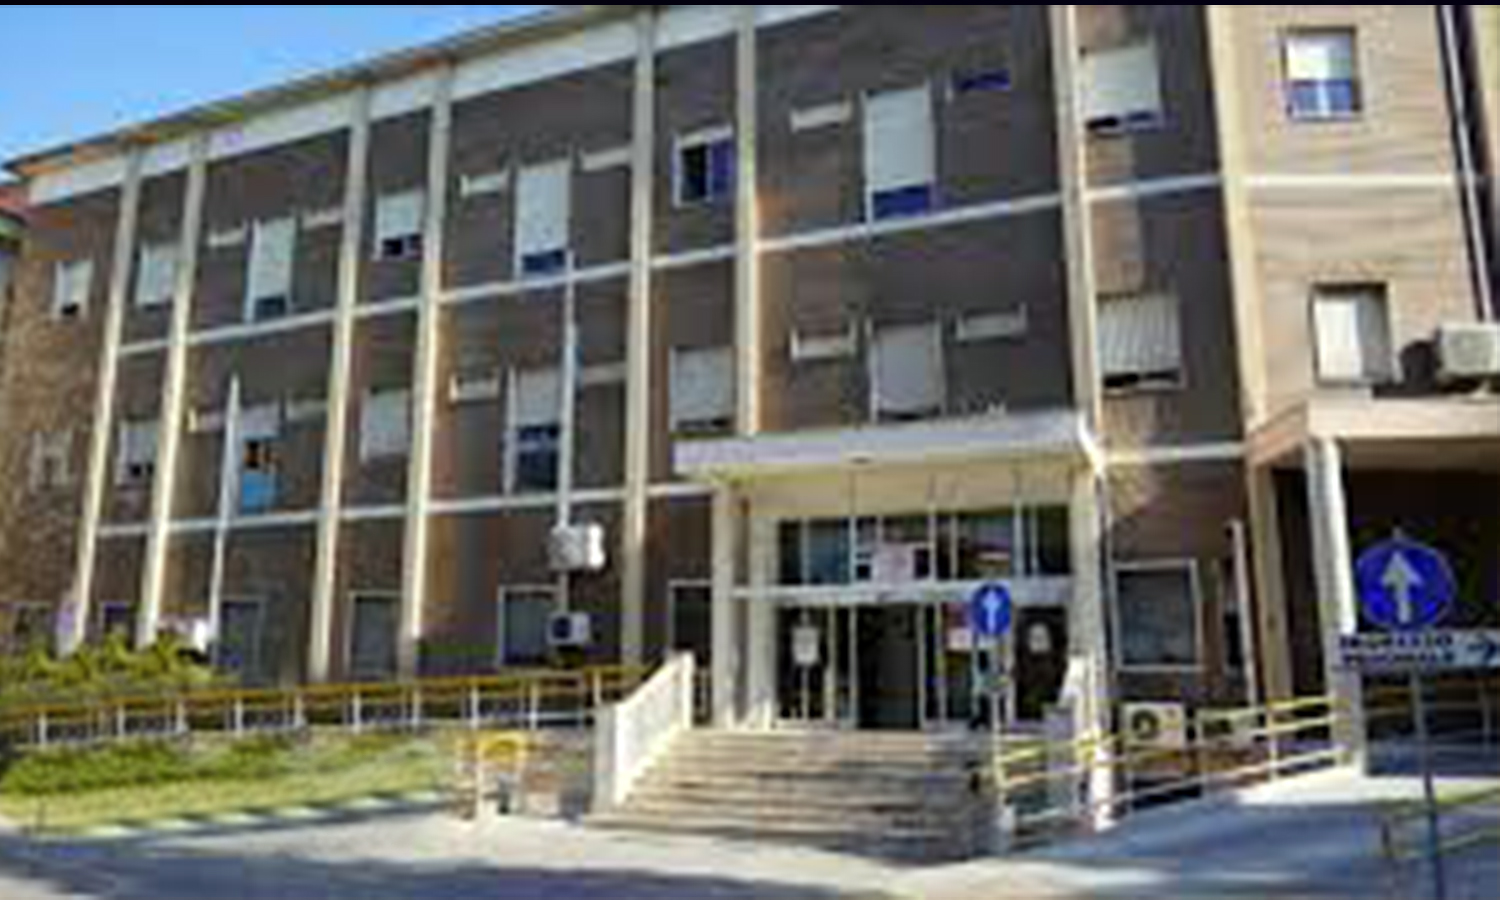 lanciano ospedale